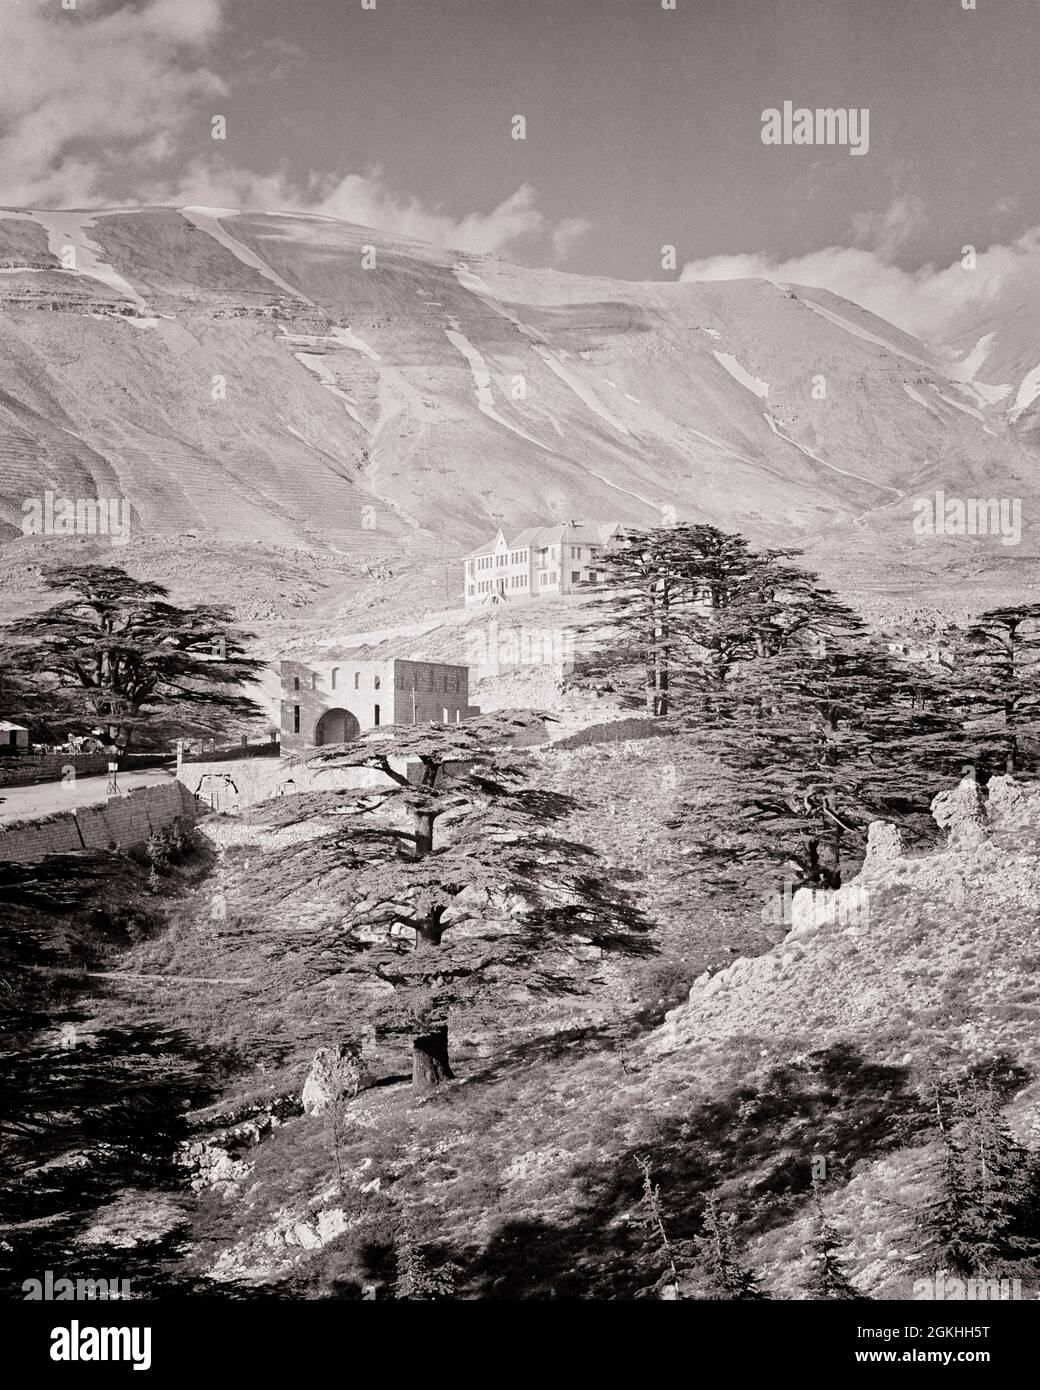 1950s 1960s HISTORIC CEDARS OF LEBANON IN KADISHA VALLEY KNOWN FOR MANY MONASTERIES CEDAR TREES OFTEN CALLED THE CEDARS OF GOD - r3151 HAR001 HARS ENDURING LEBANON NATIONAL EMBLEM BELIEF BLACK AND WHITE CONIFER ENDANGERED HAR001 KNOWN MIDDLE EAST OLD FASHIONED REPRESENTATION Stock Photo